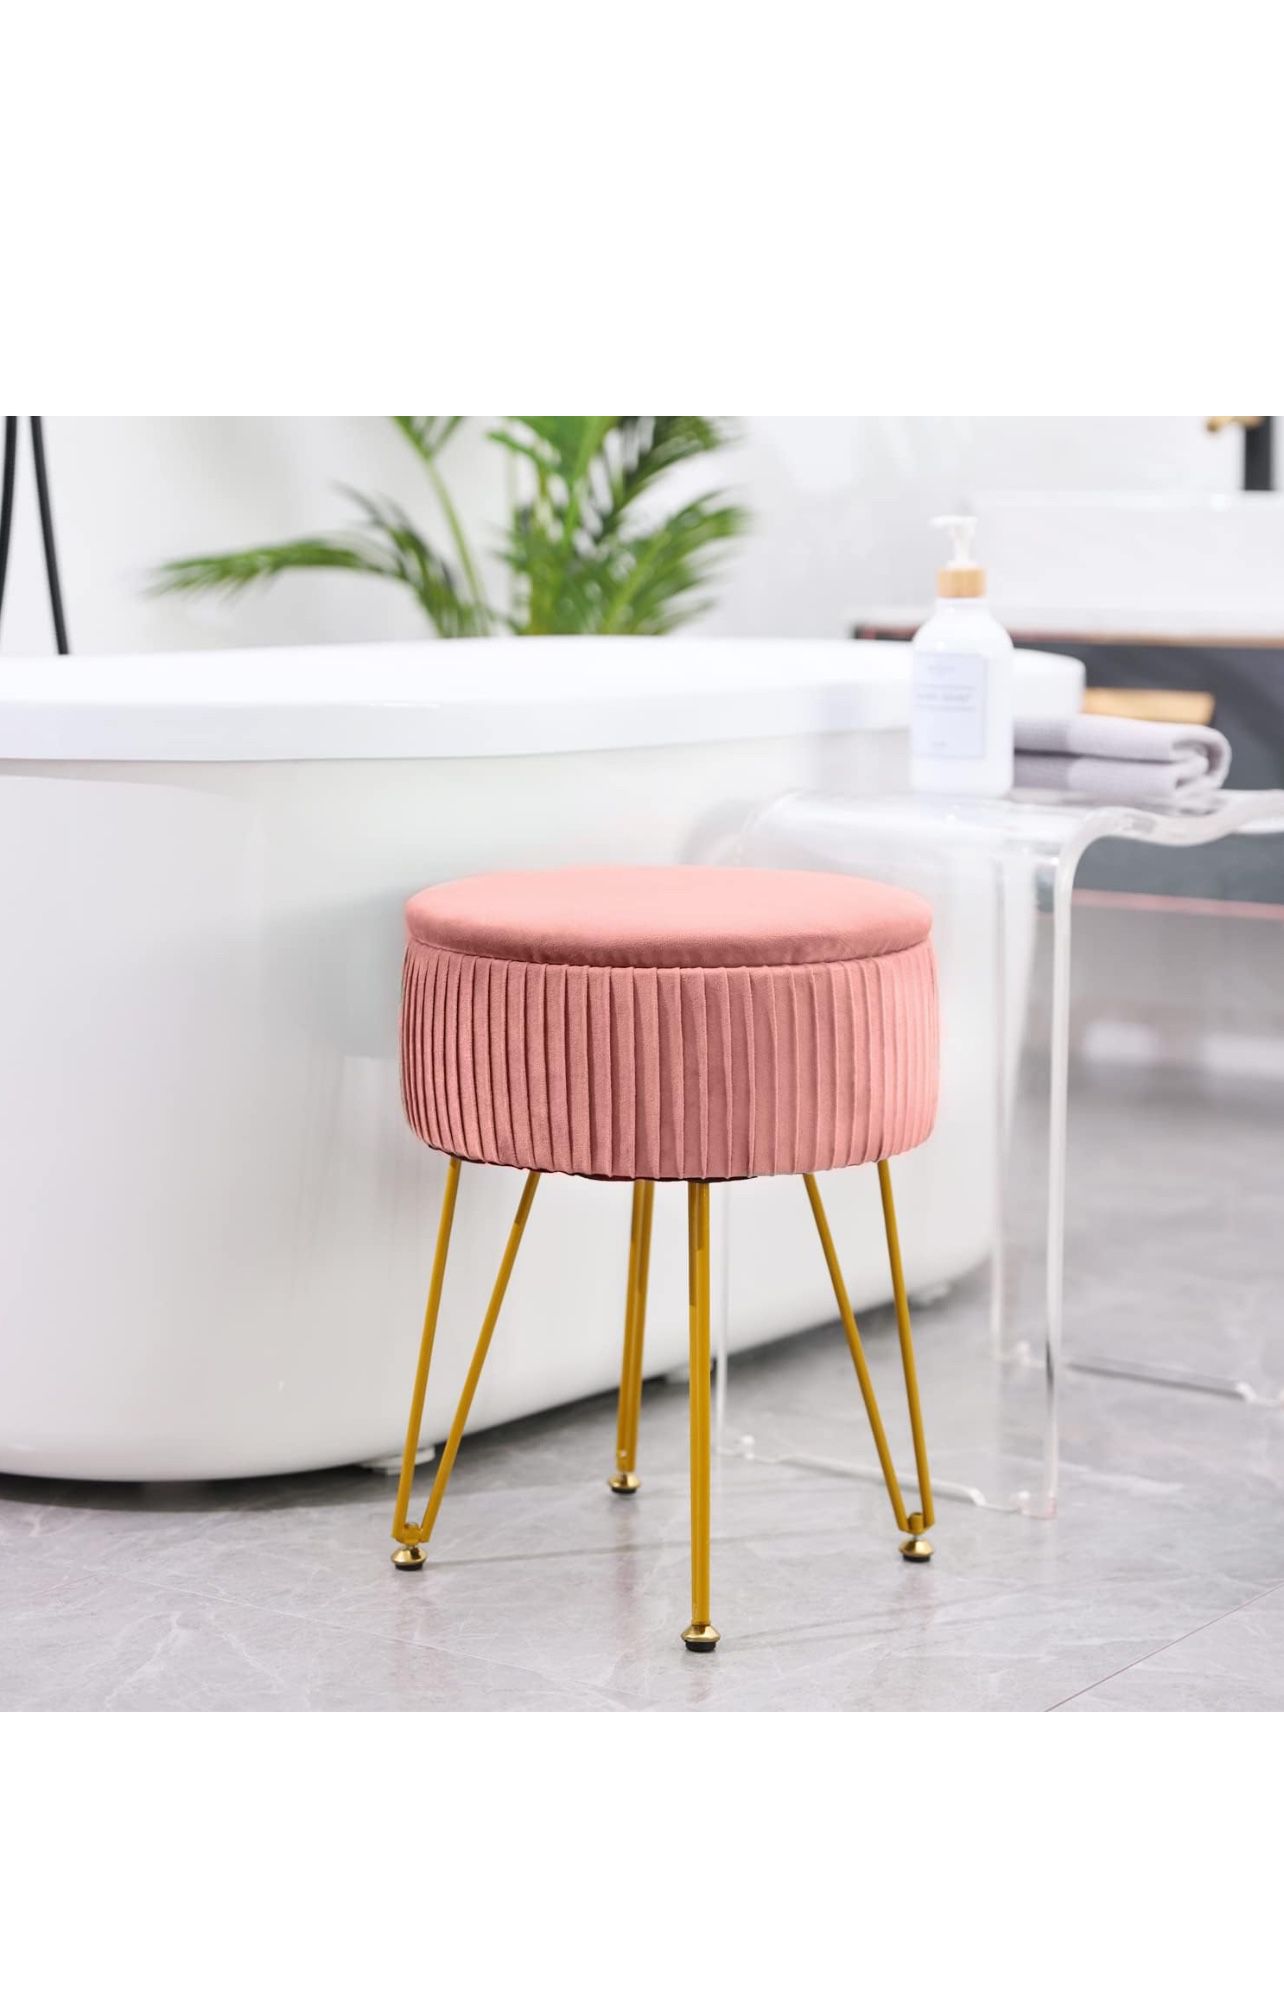 Velvet Storage Ottoman Foot Rest Makeup Footstool Velvet Footrest Chair with 4 Metal Legs Storage Stool and Ottomans for Living Room and Bedroom-Pink